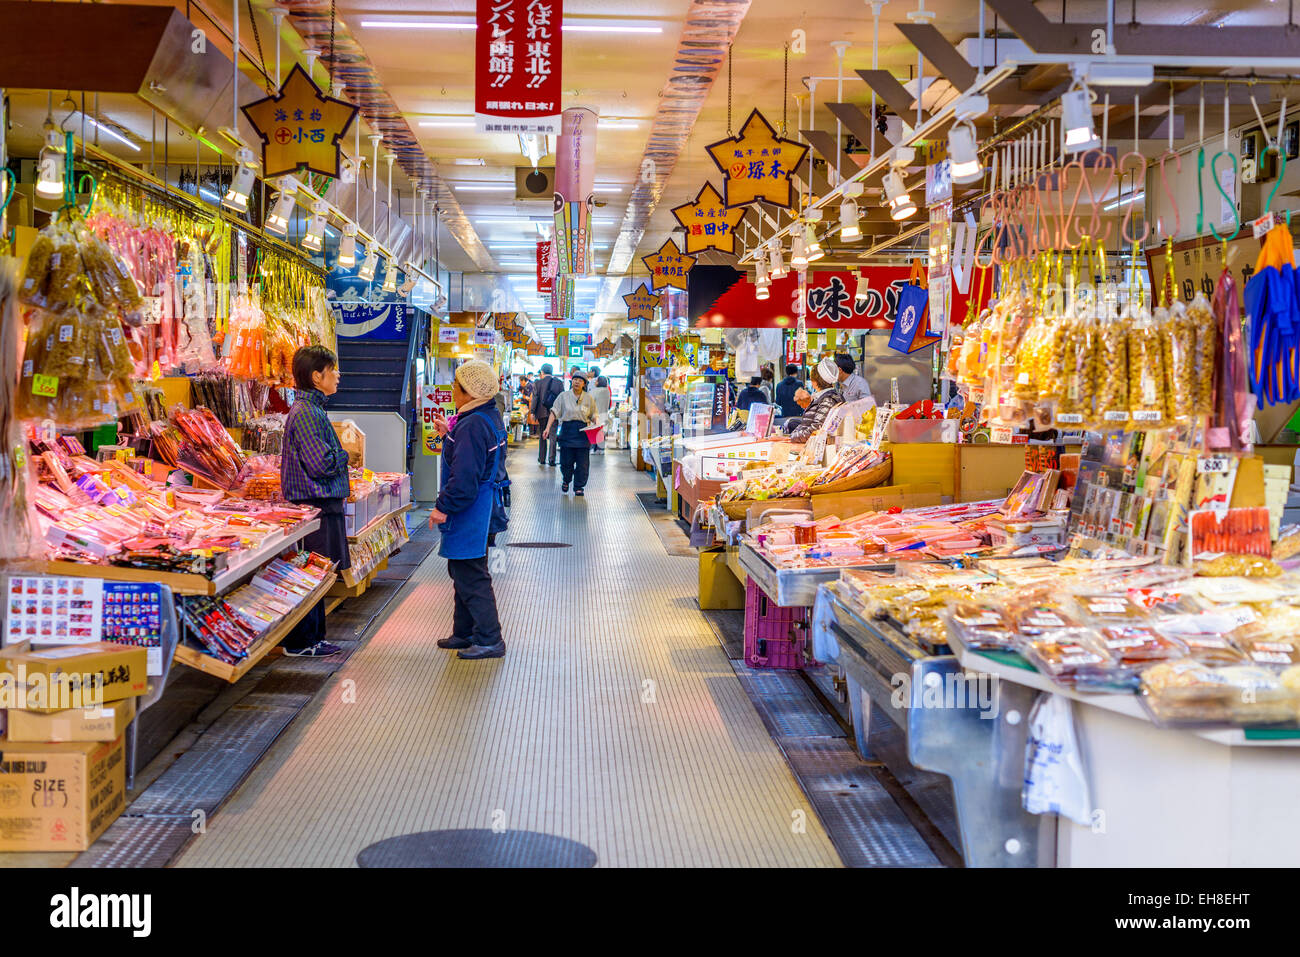 Workers set up for the morning market in Hakodate, Japan. Stock Photo